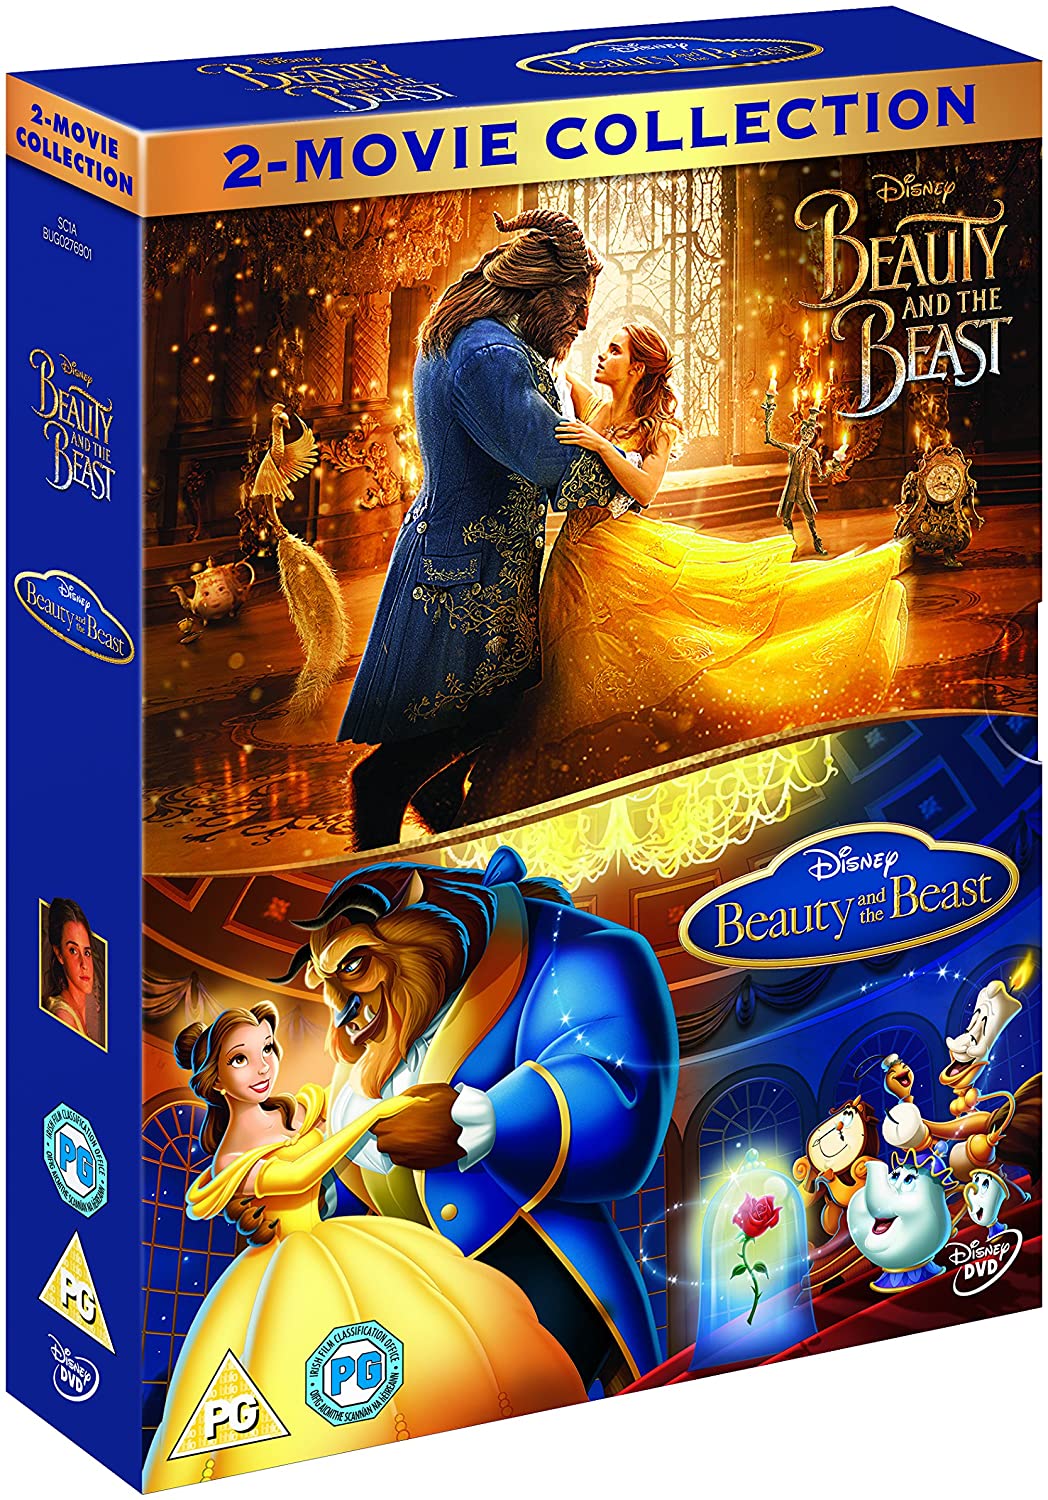 Beauty And The Beast Live Action/Animated Doublepack [DVD] [2017]